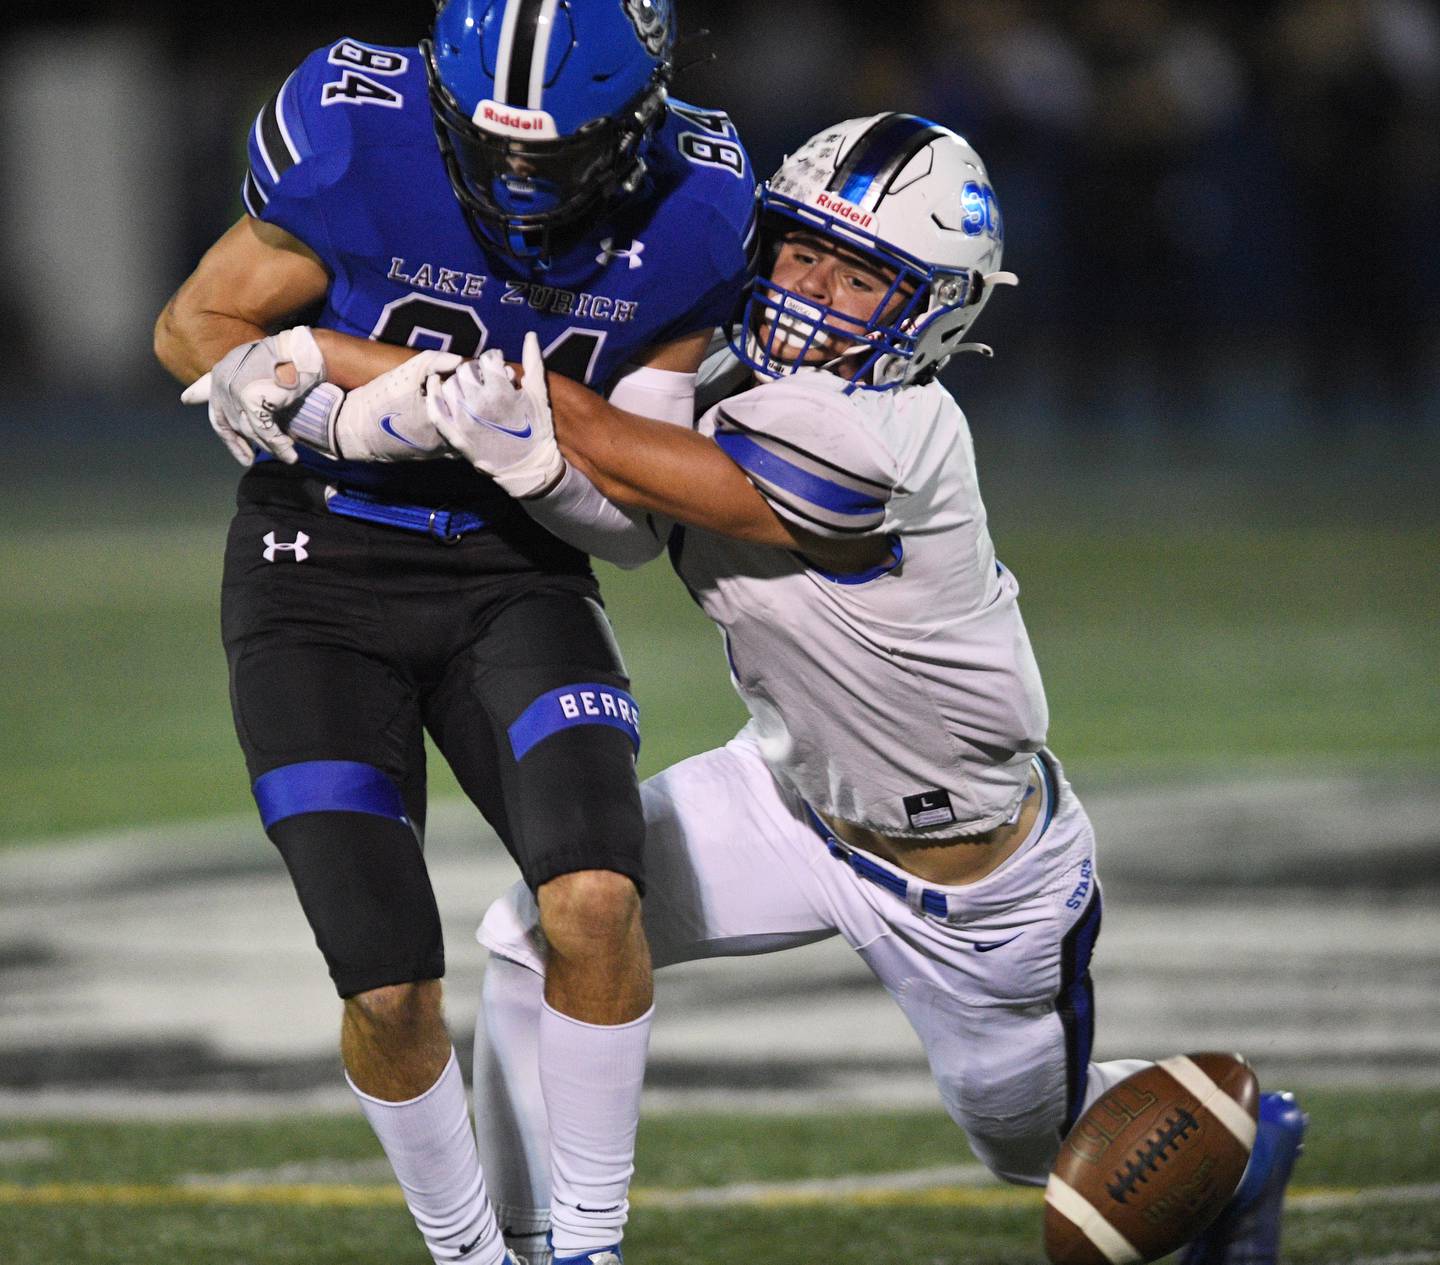 St. Charles North's George Litgen forces and incomplete pass to Lake Zurich's Jack Hartman in a football game in Lake Zurich Friday, September 3, 2021.